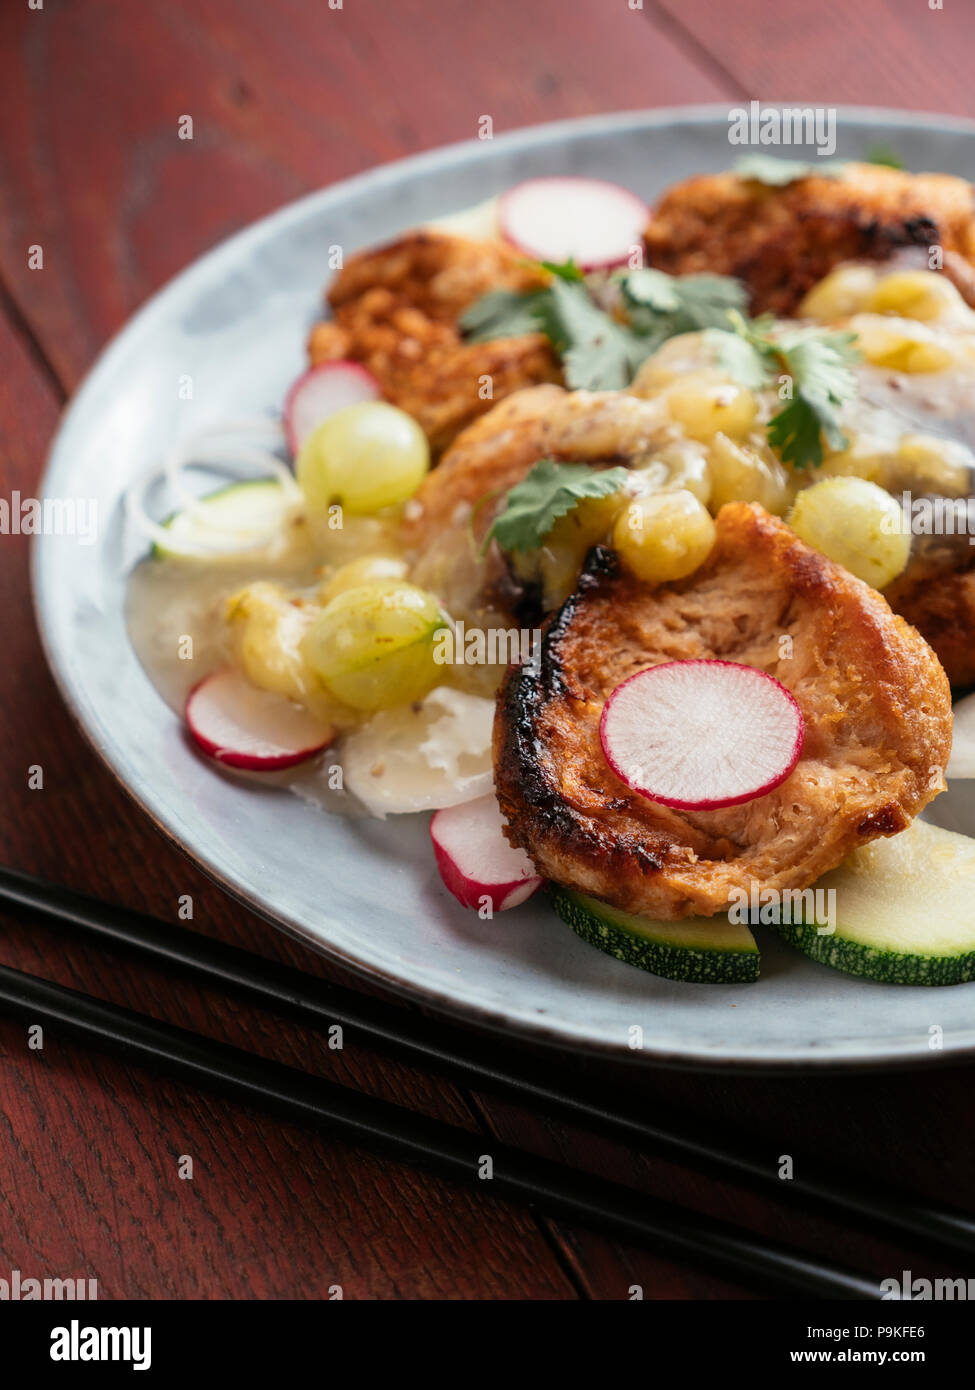 Asian Barbecued TVP Medallion Salad with Gooseberry Sauce. Stock Photo